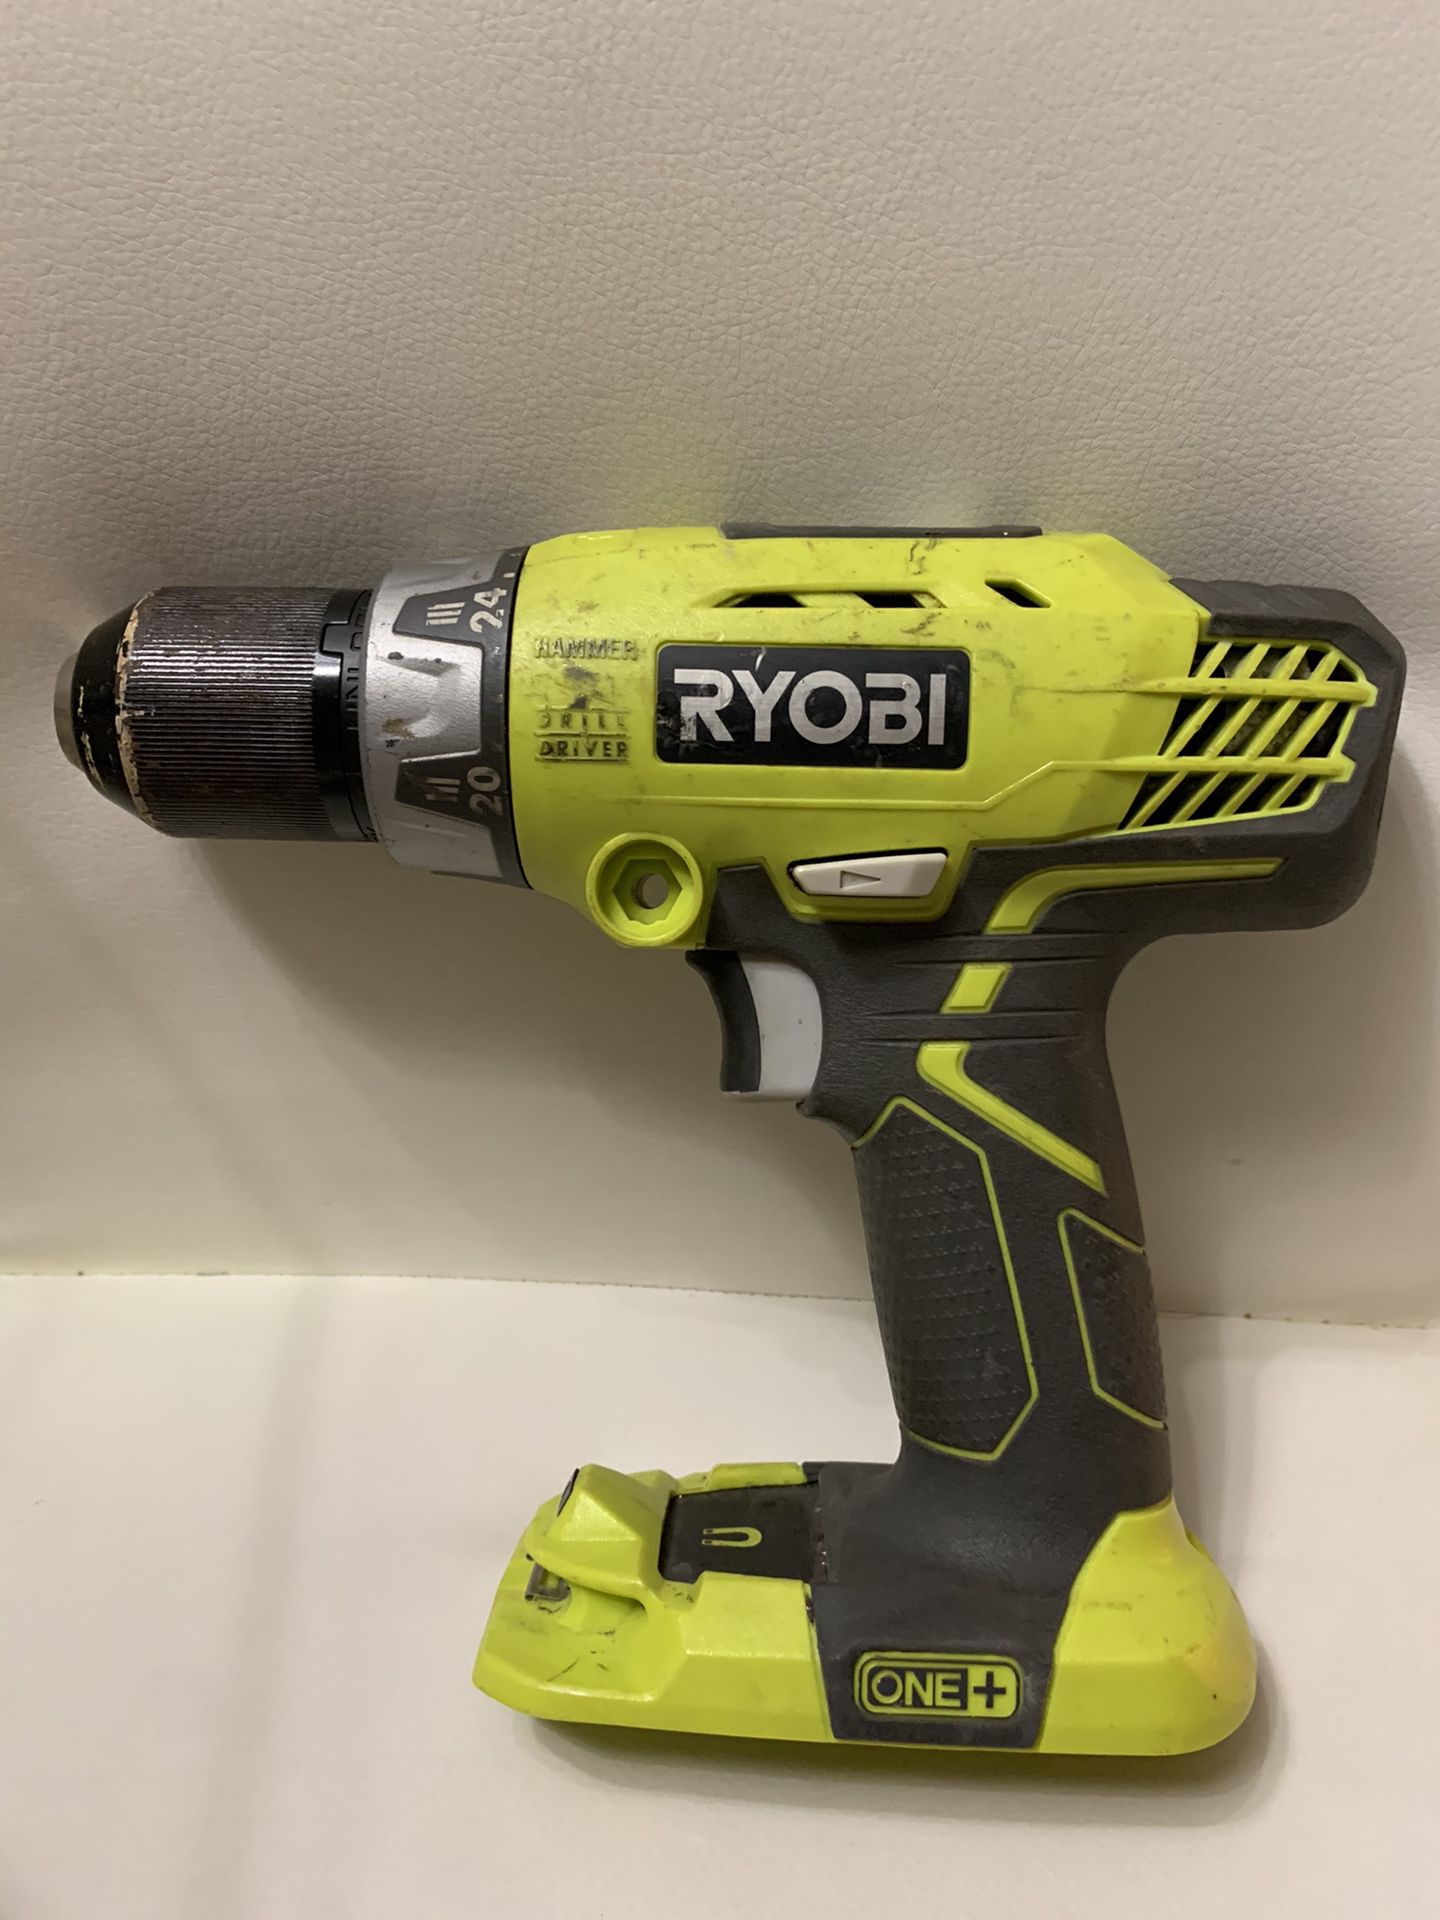 RYOBI 18V 2-SPEED CORDLESS 1/2 in COMPACT DRILL ( USED tool only )